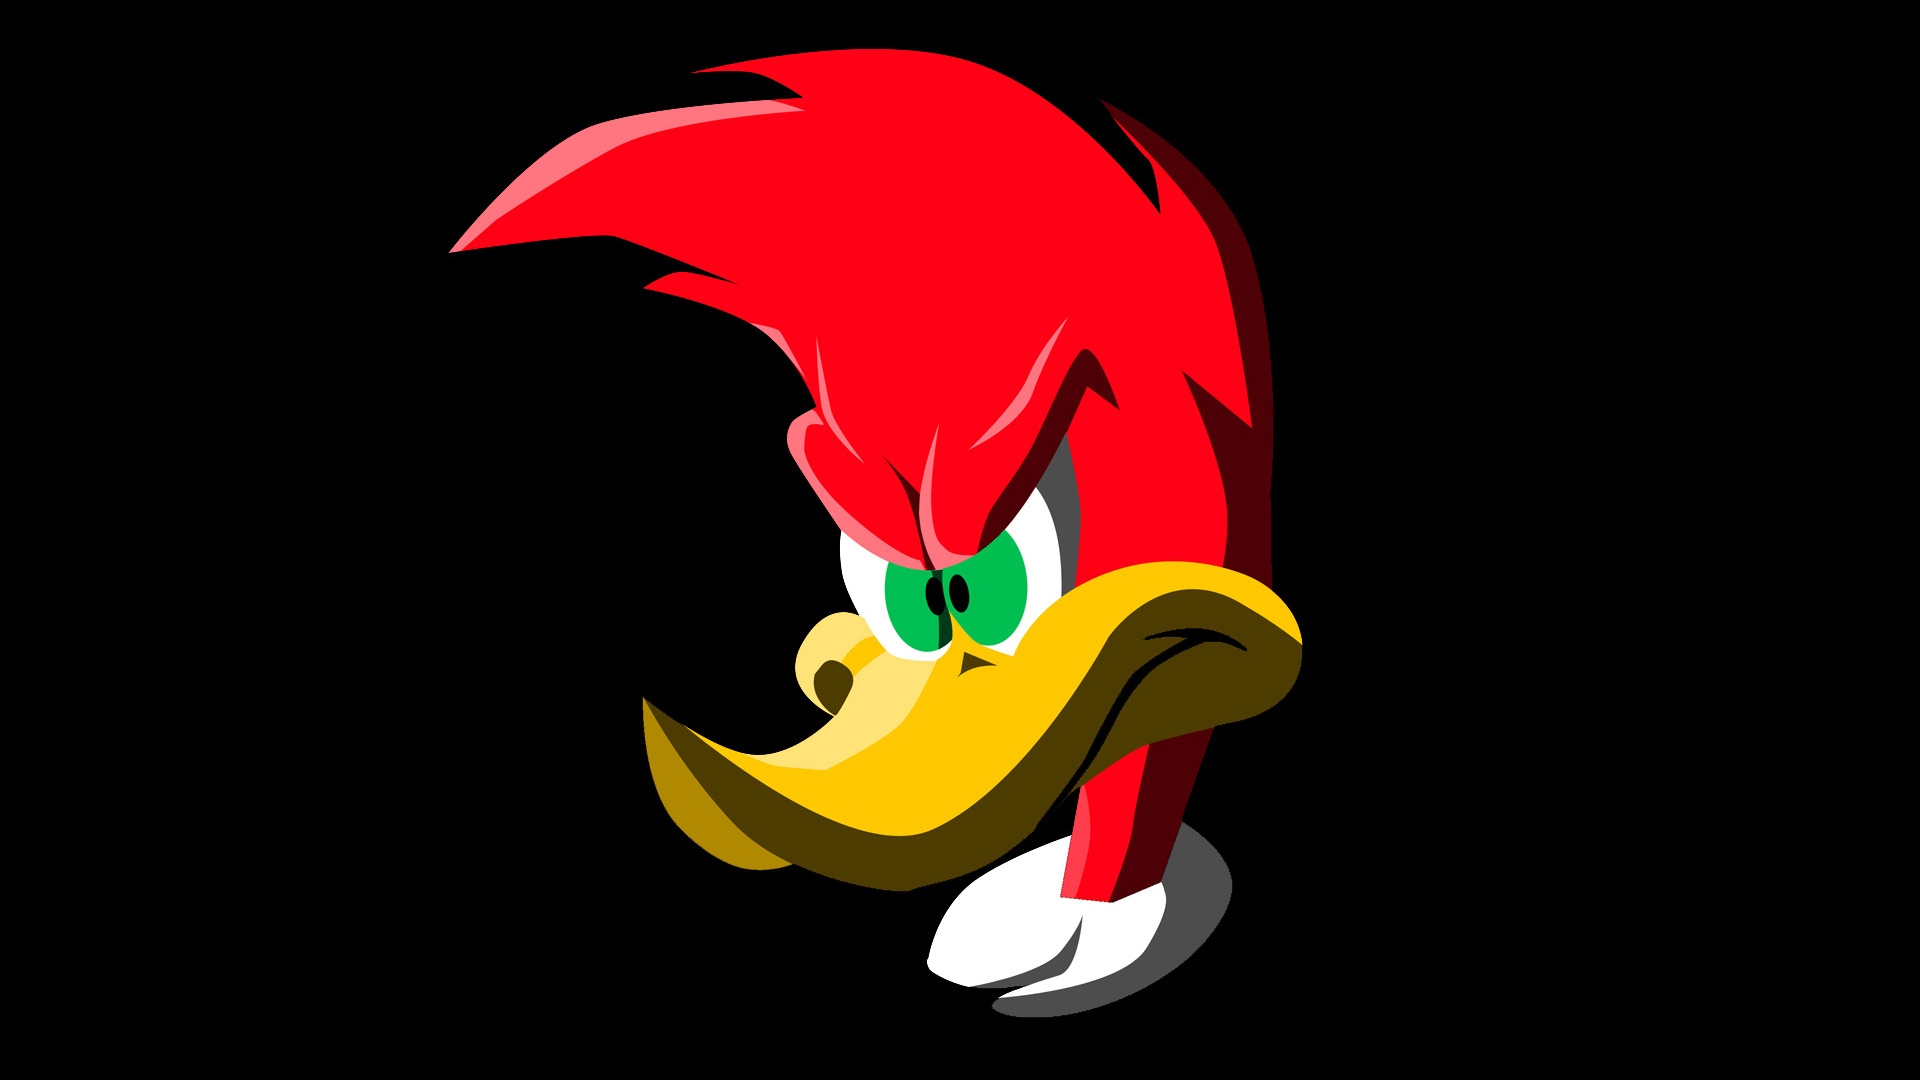 Woody Woodpecker for 1920 x 1080 HDTV 1080p resolution